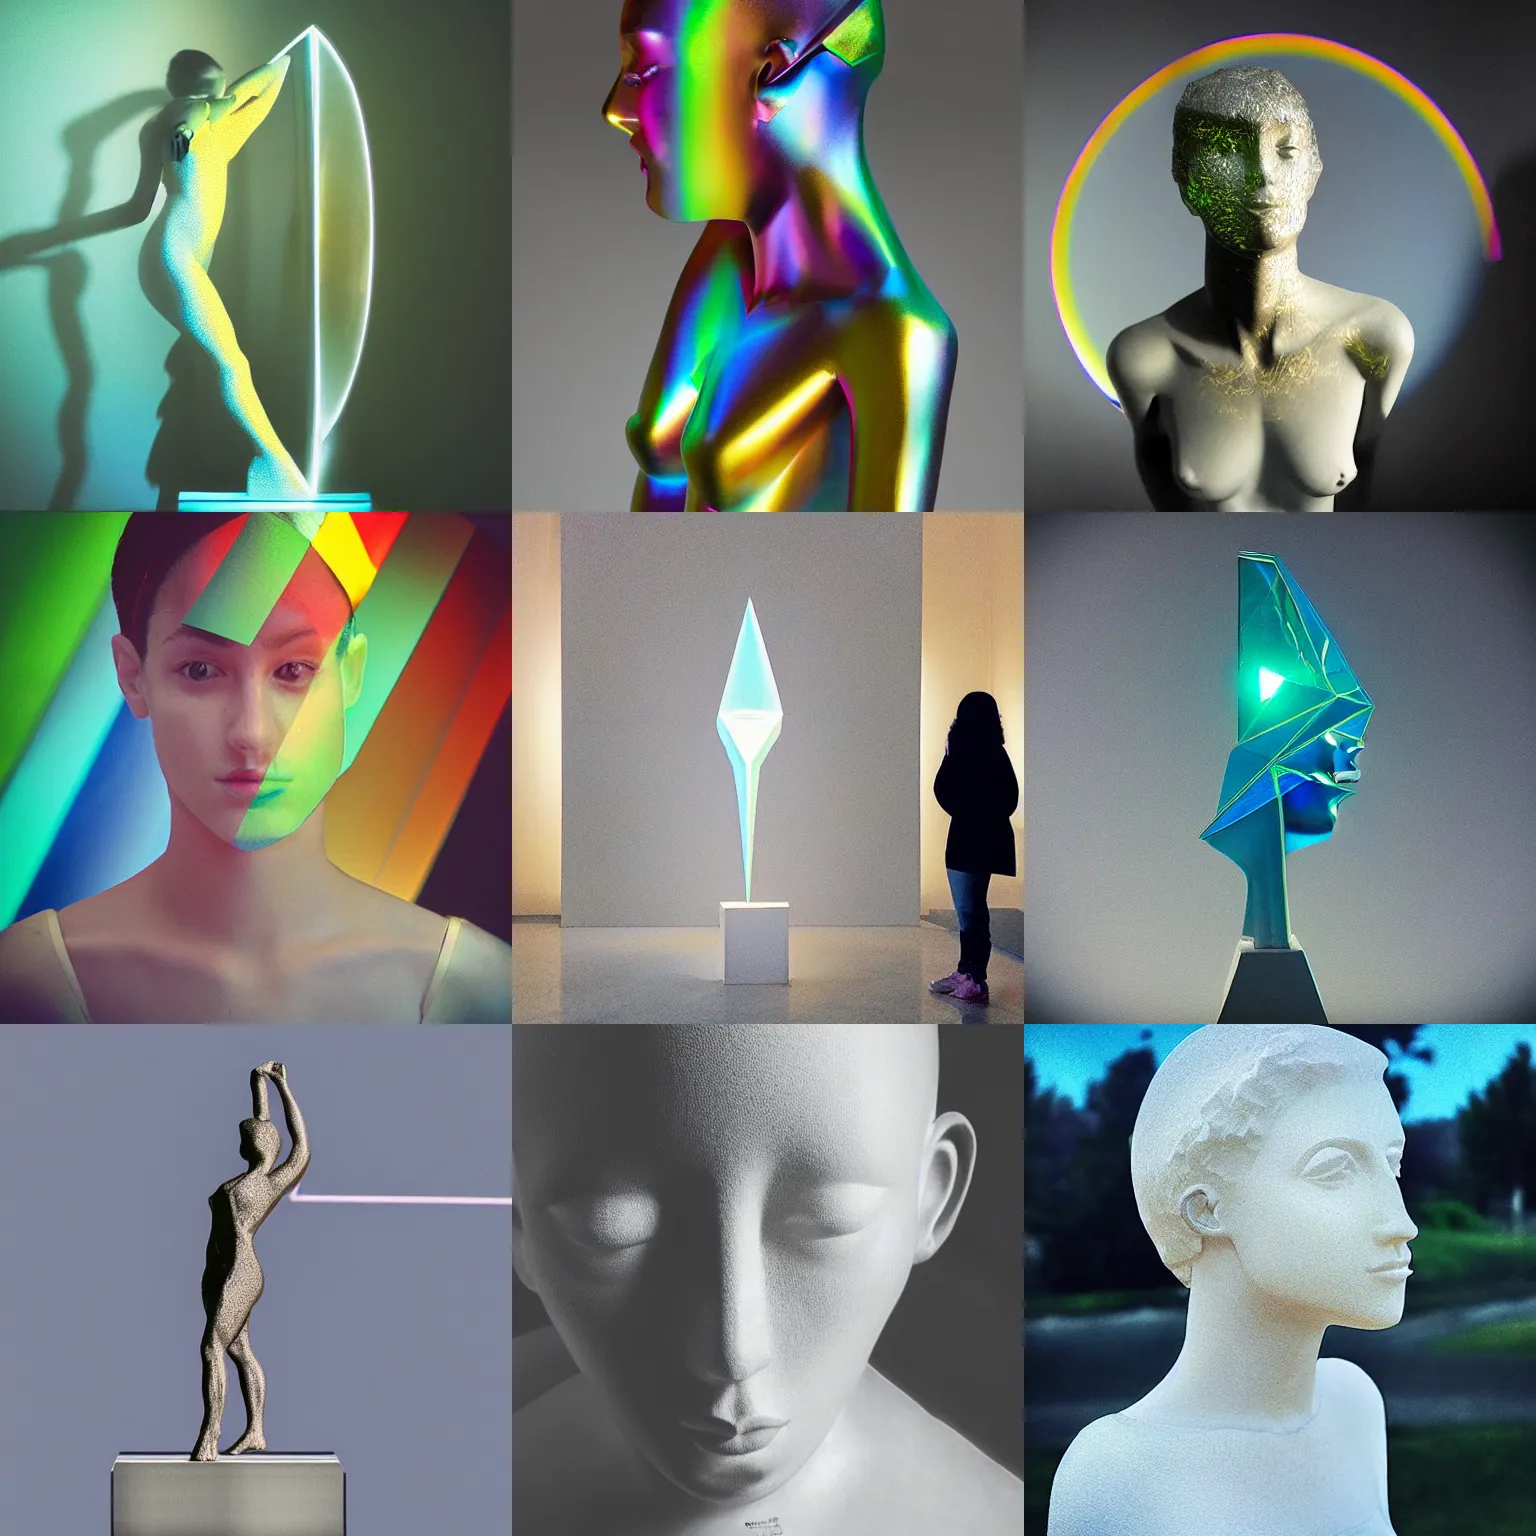 Prompt: “Prism in the shape of a sculpture of a person, refraction, beam shining through, epic, 8k”